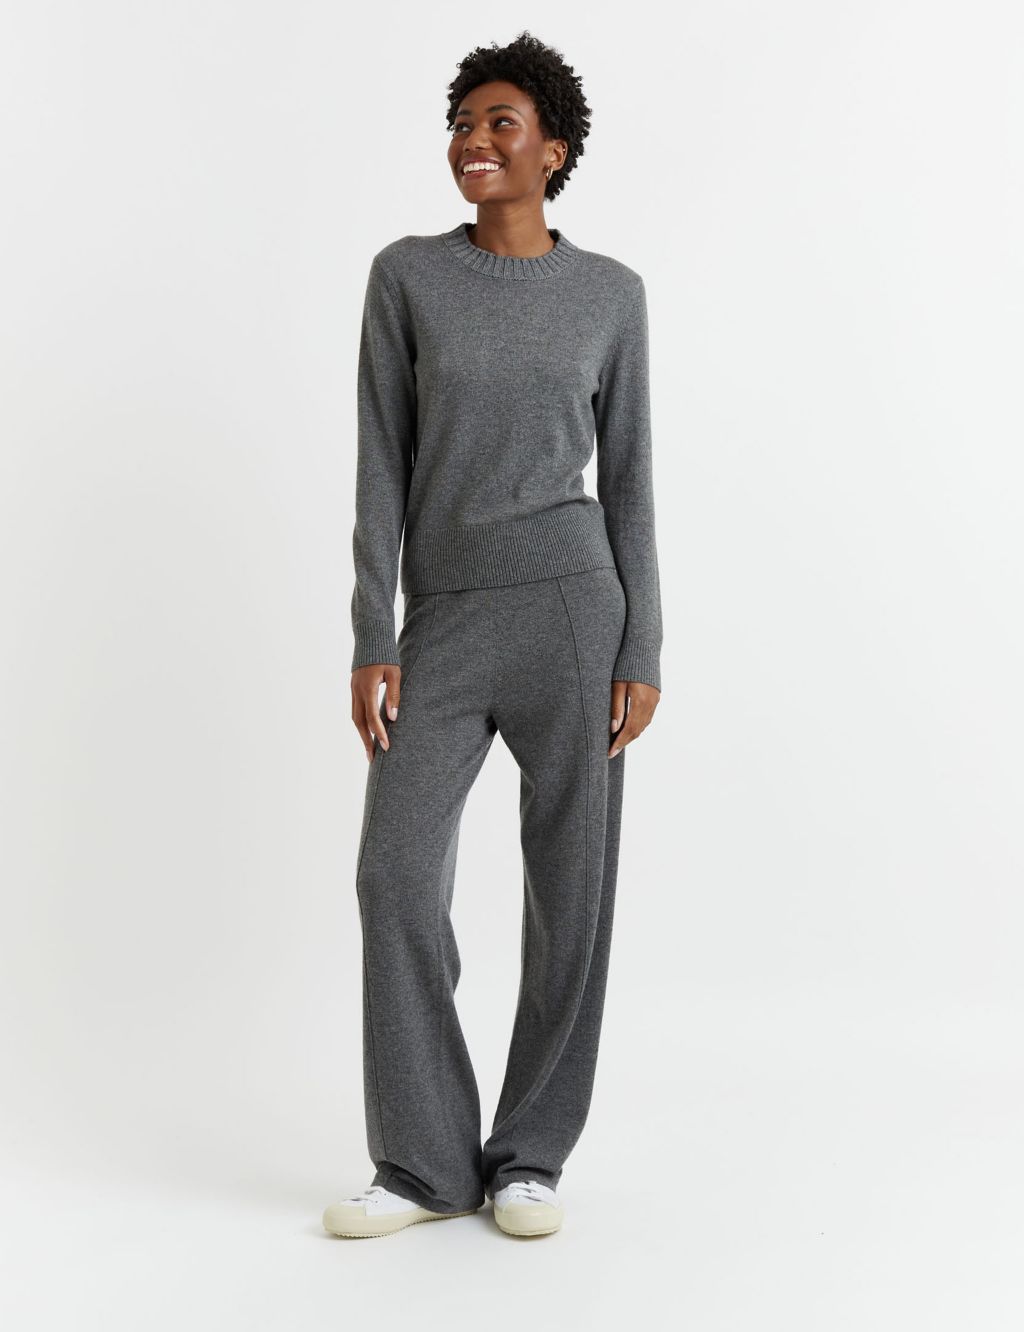 Marks and Spencer Women's Loungewear Cozy Knit Rib Cuffed Pant, Grey Mix,  12 Long at  Women's Clothing store